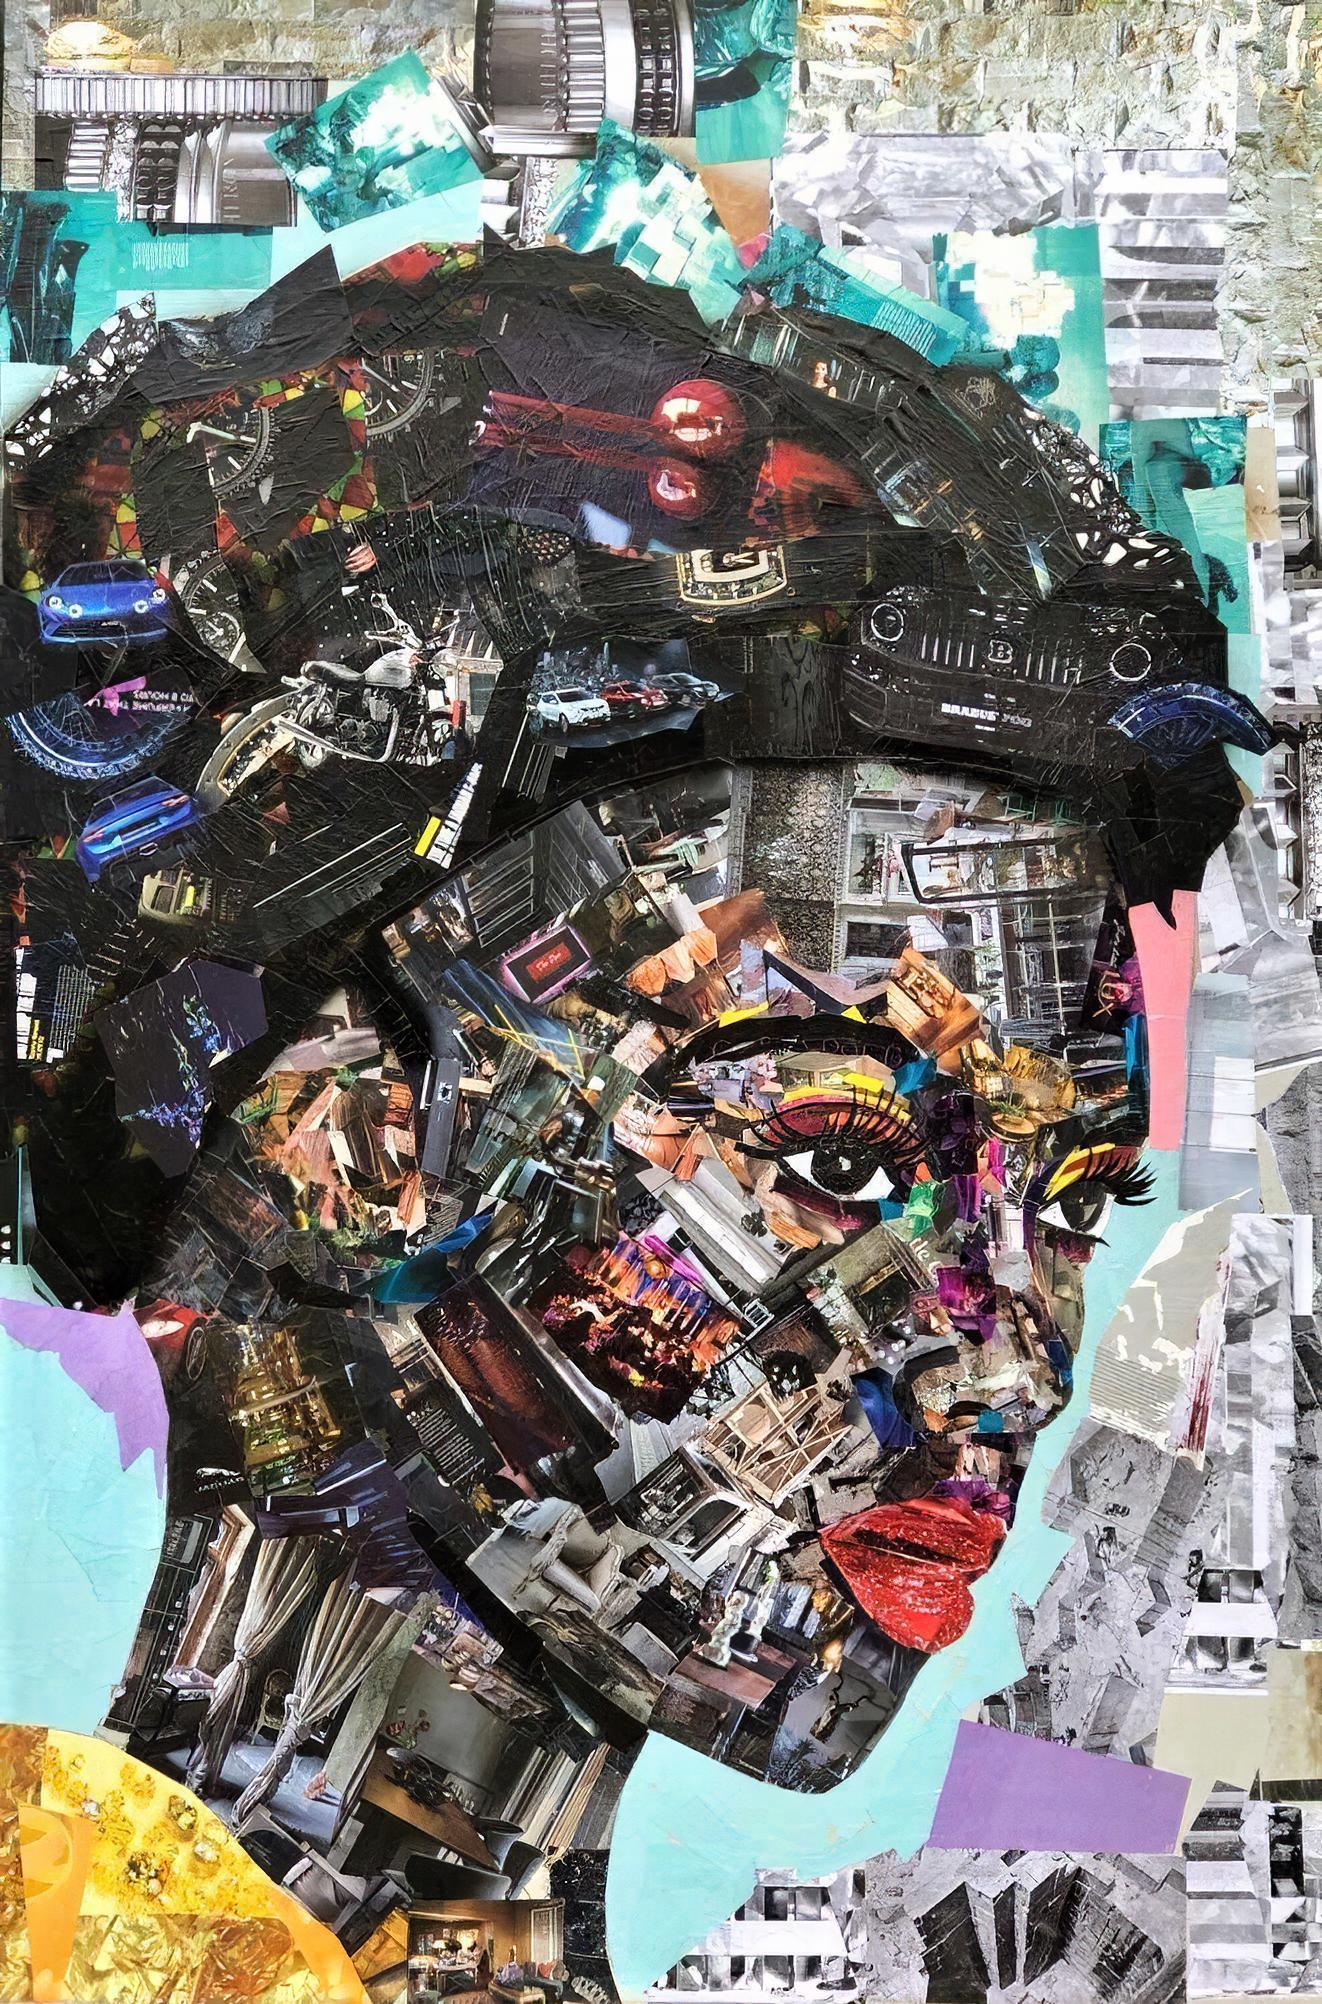 Large Vibrant Collage on Canvas Portrait - Mixed Media Art by Dario Manjate